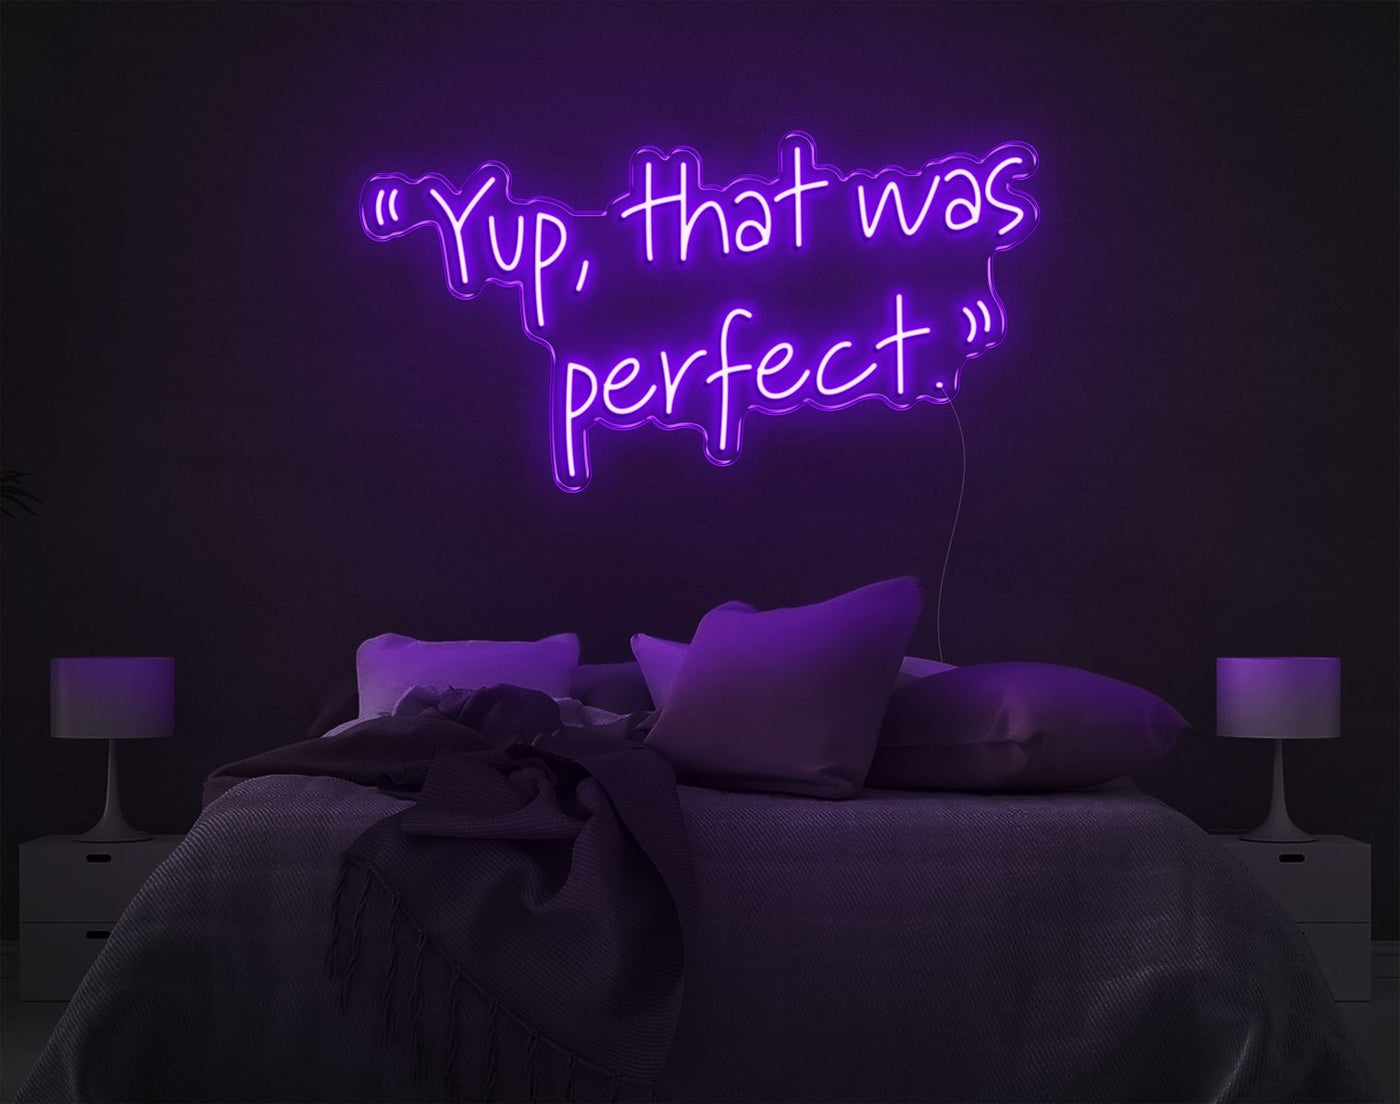 Yup, That Was Perfect LED Neon Sign - 19inch x 35inchHot Pink